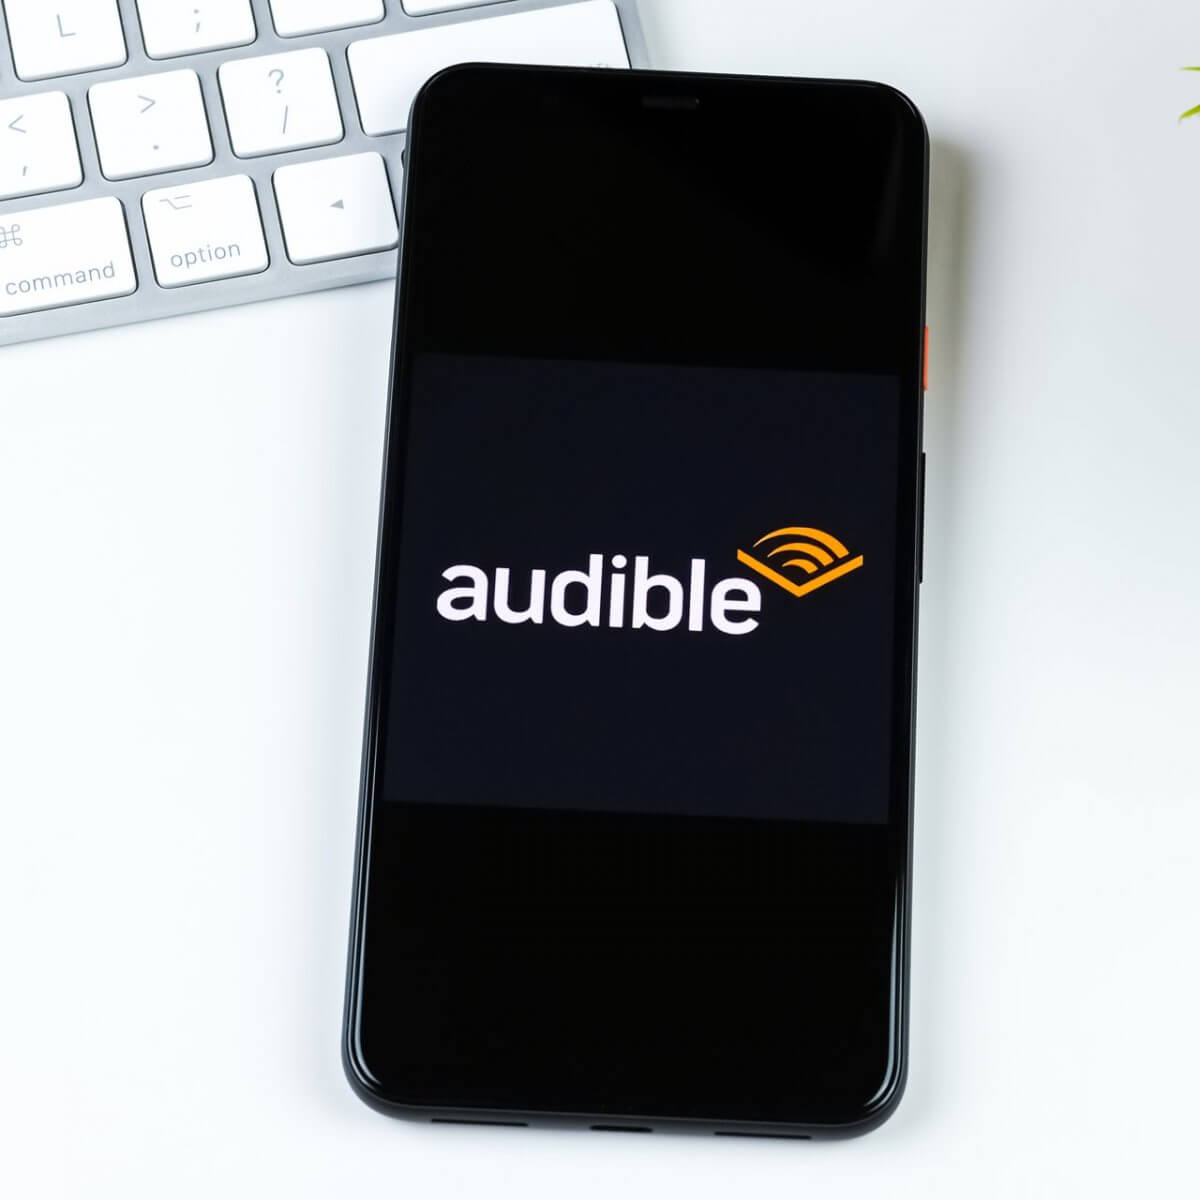 install audible manager on pc